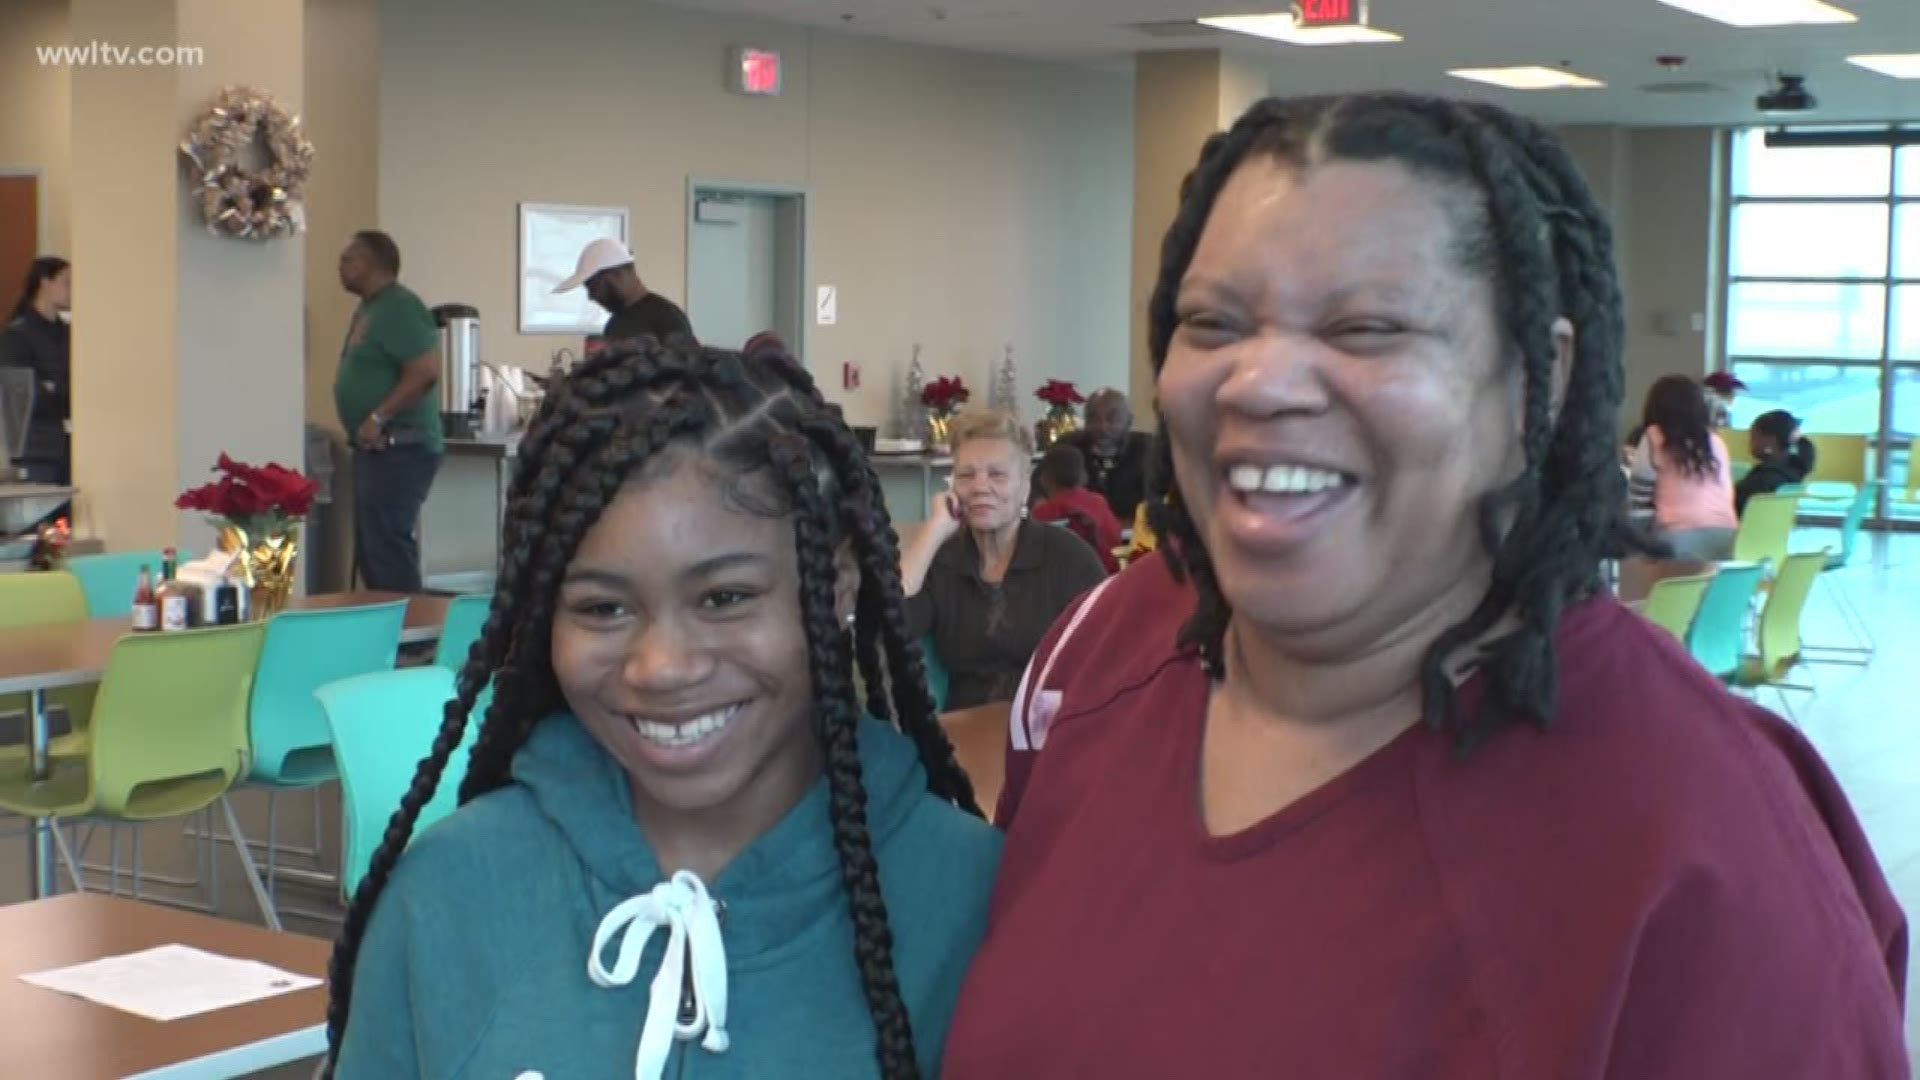 Inside the OPSO cafeteria, complete with a Christmas tree, presents donated from local church groups and a visit from Santa, incarcerated mothers had the chance to hug, laugh and learn with their children.